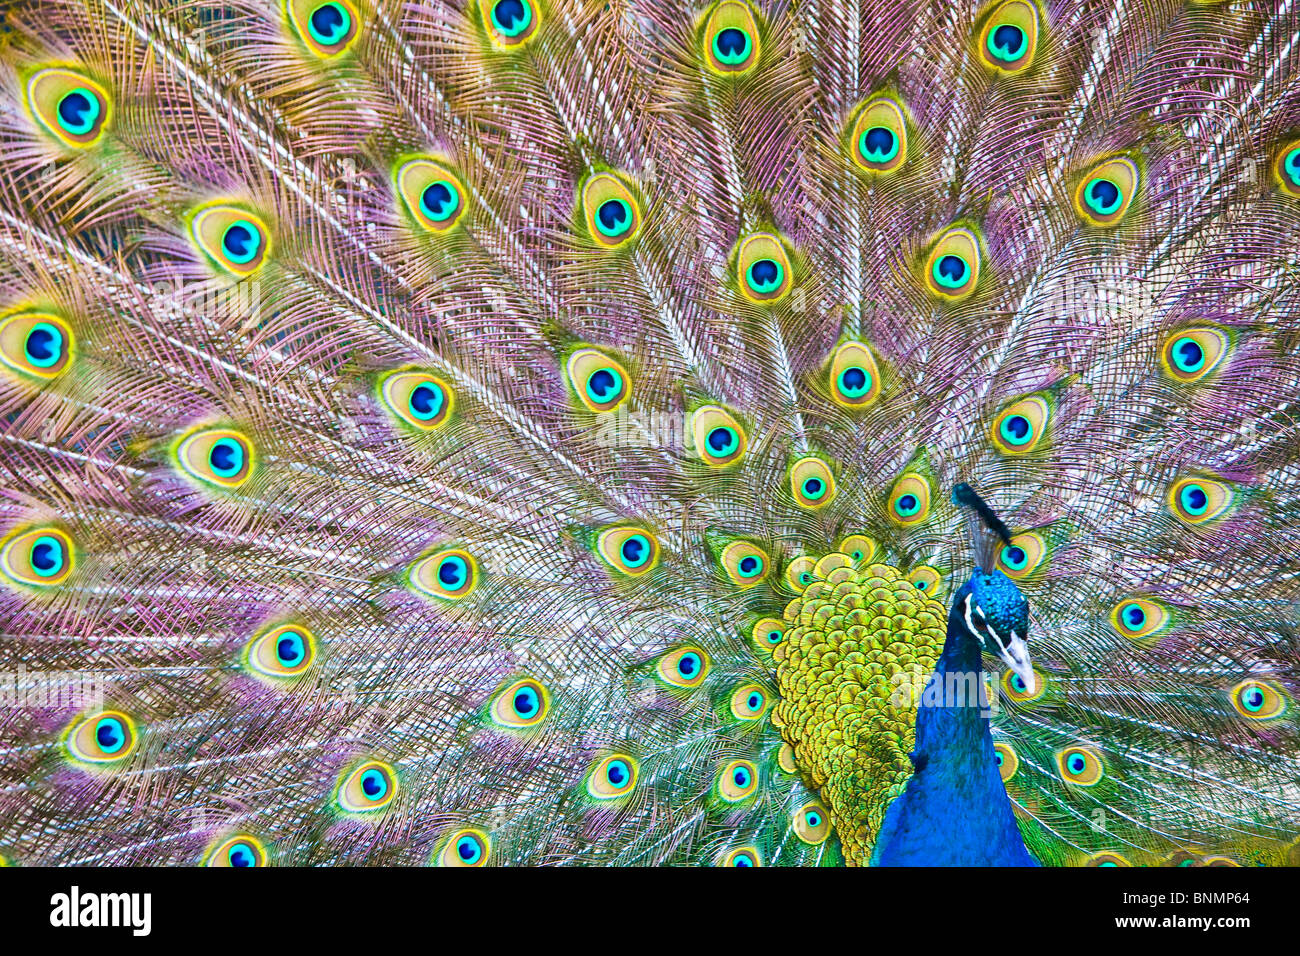 Male peacock with feathers on display Stock Photo